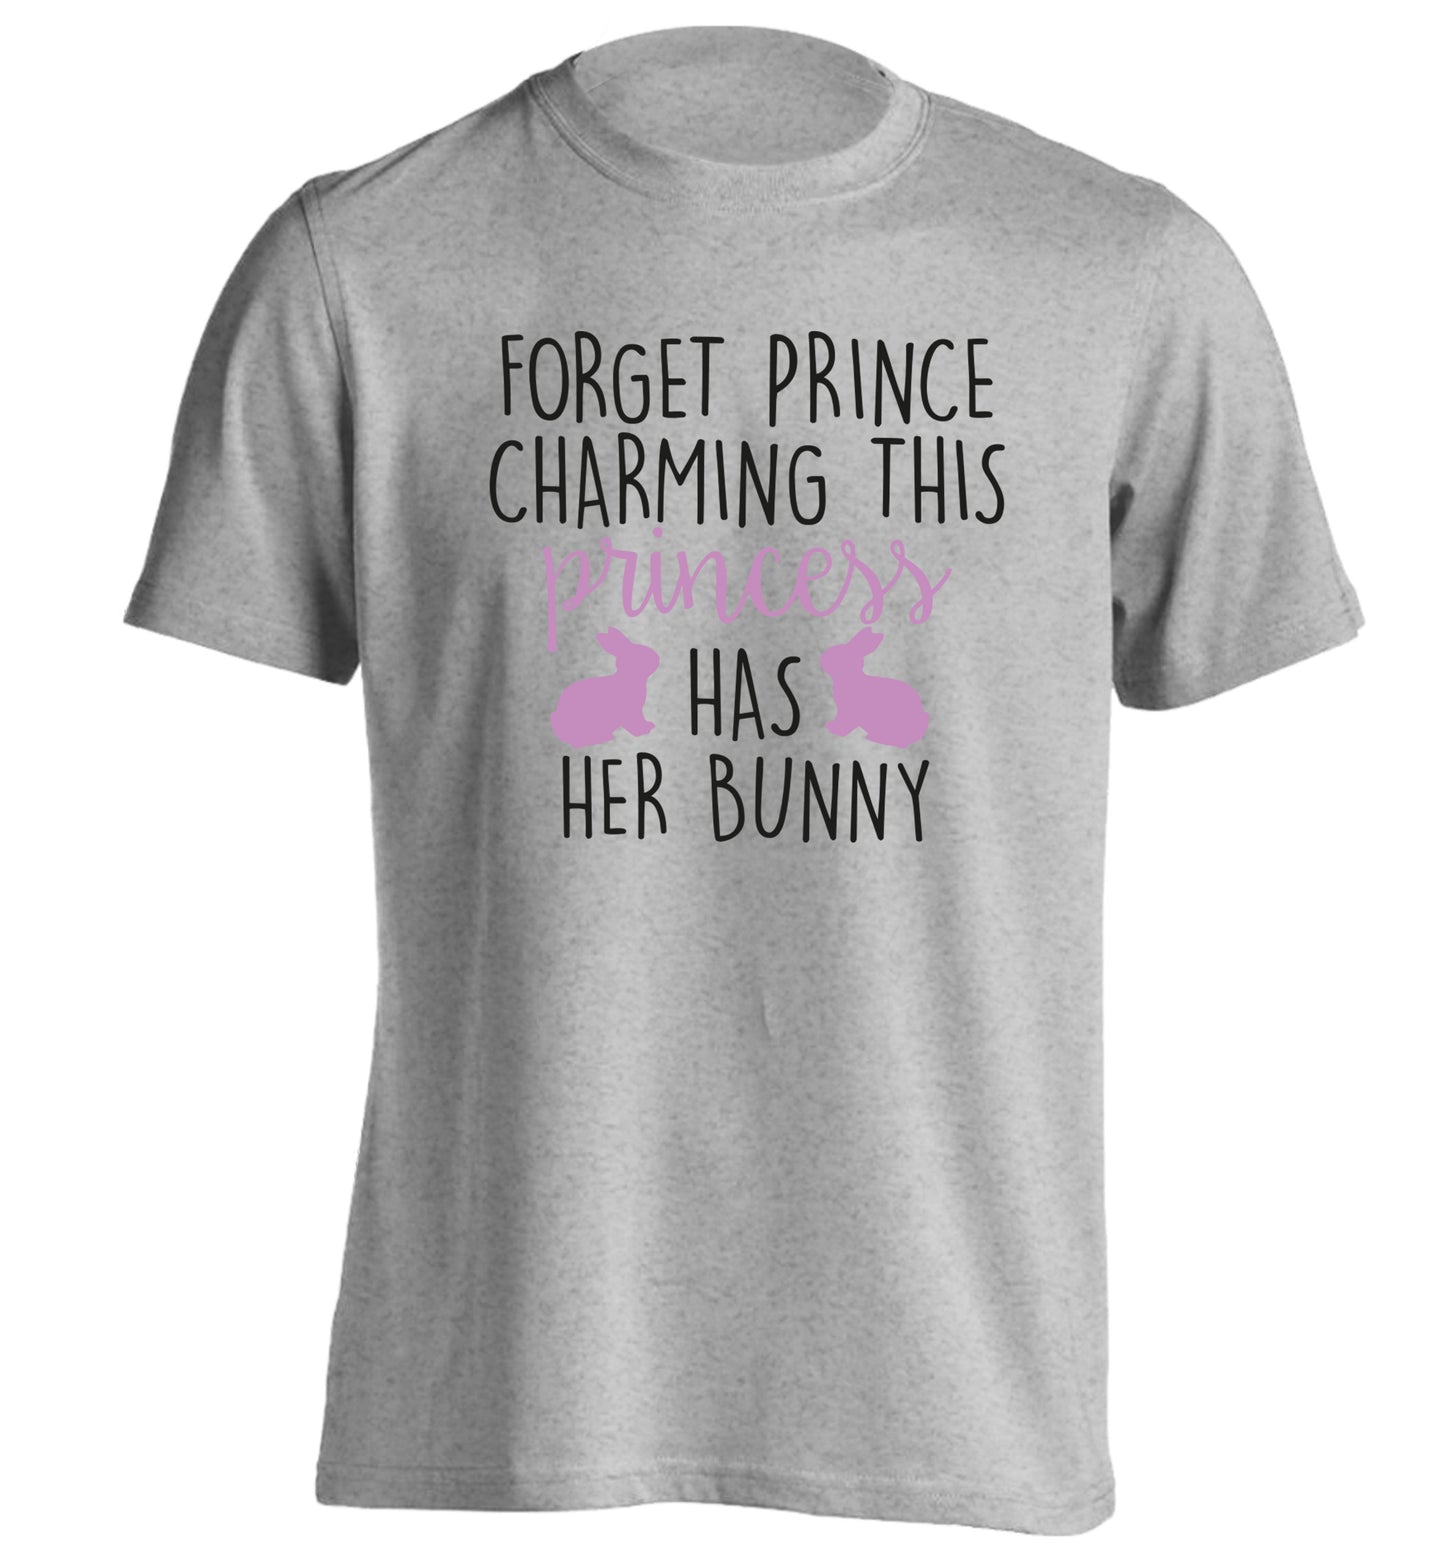 Forget prince charming this princess has her bunny adults unisex grey Tshirt 2XL